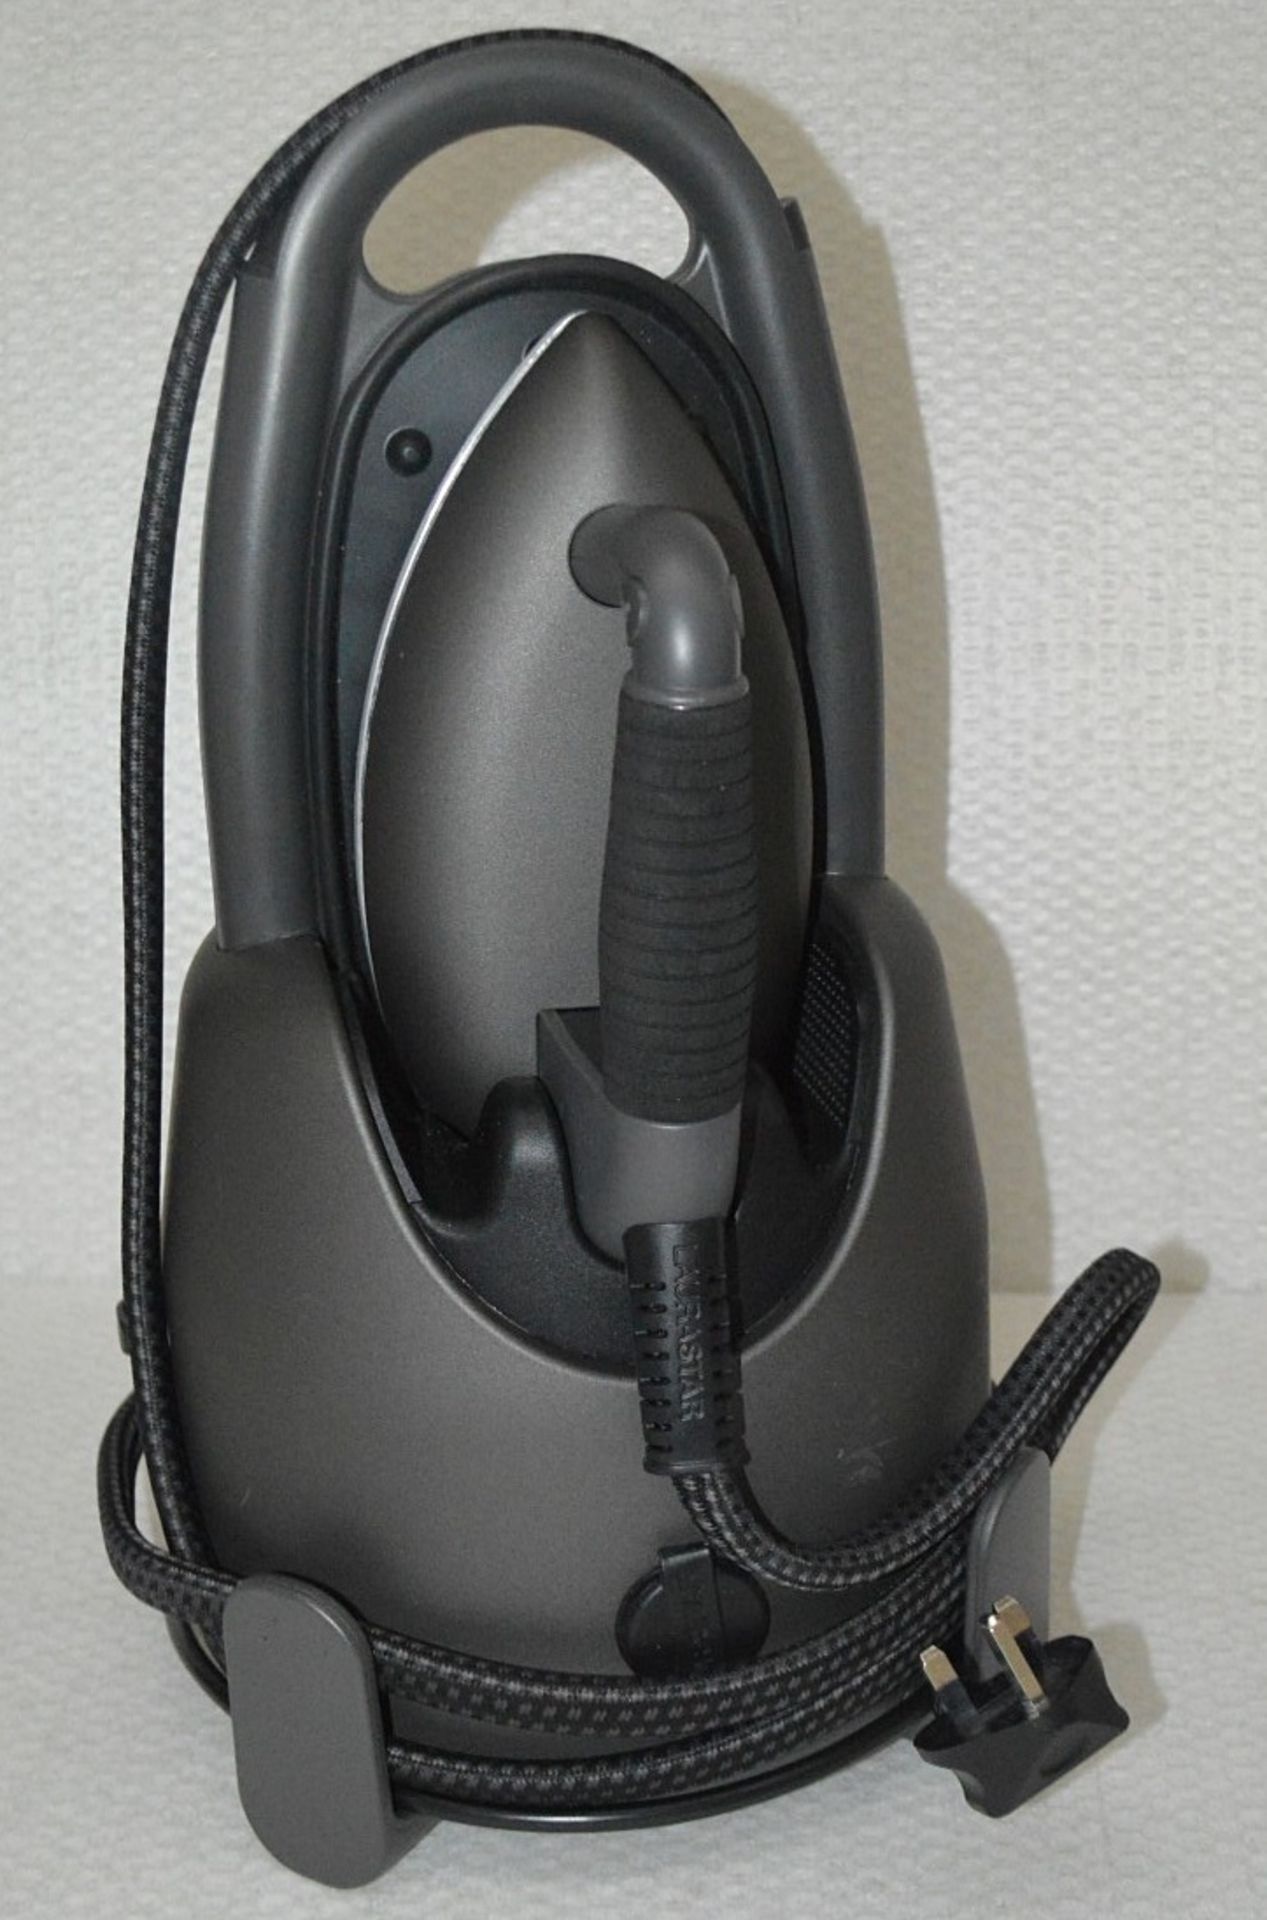 1 x Laurastar Lift Xtra 3-in-1 Steam Generator Irons, Steams and Purifies Clothing - RRP £499.00 - Image 2 of 14